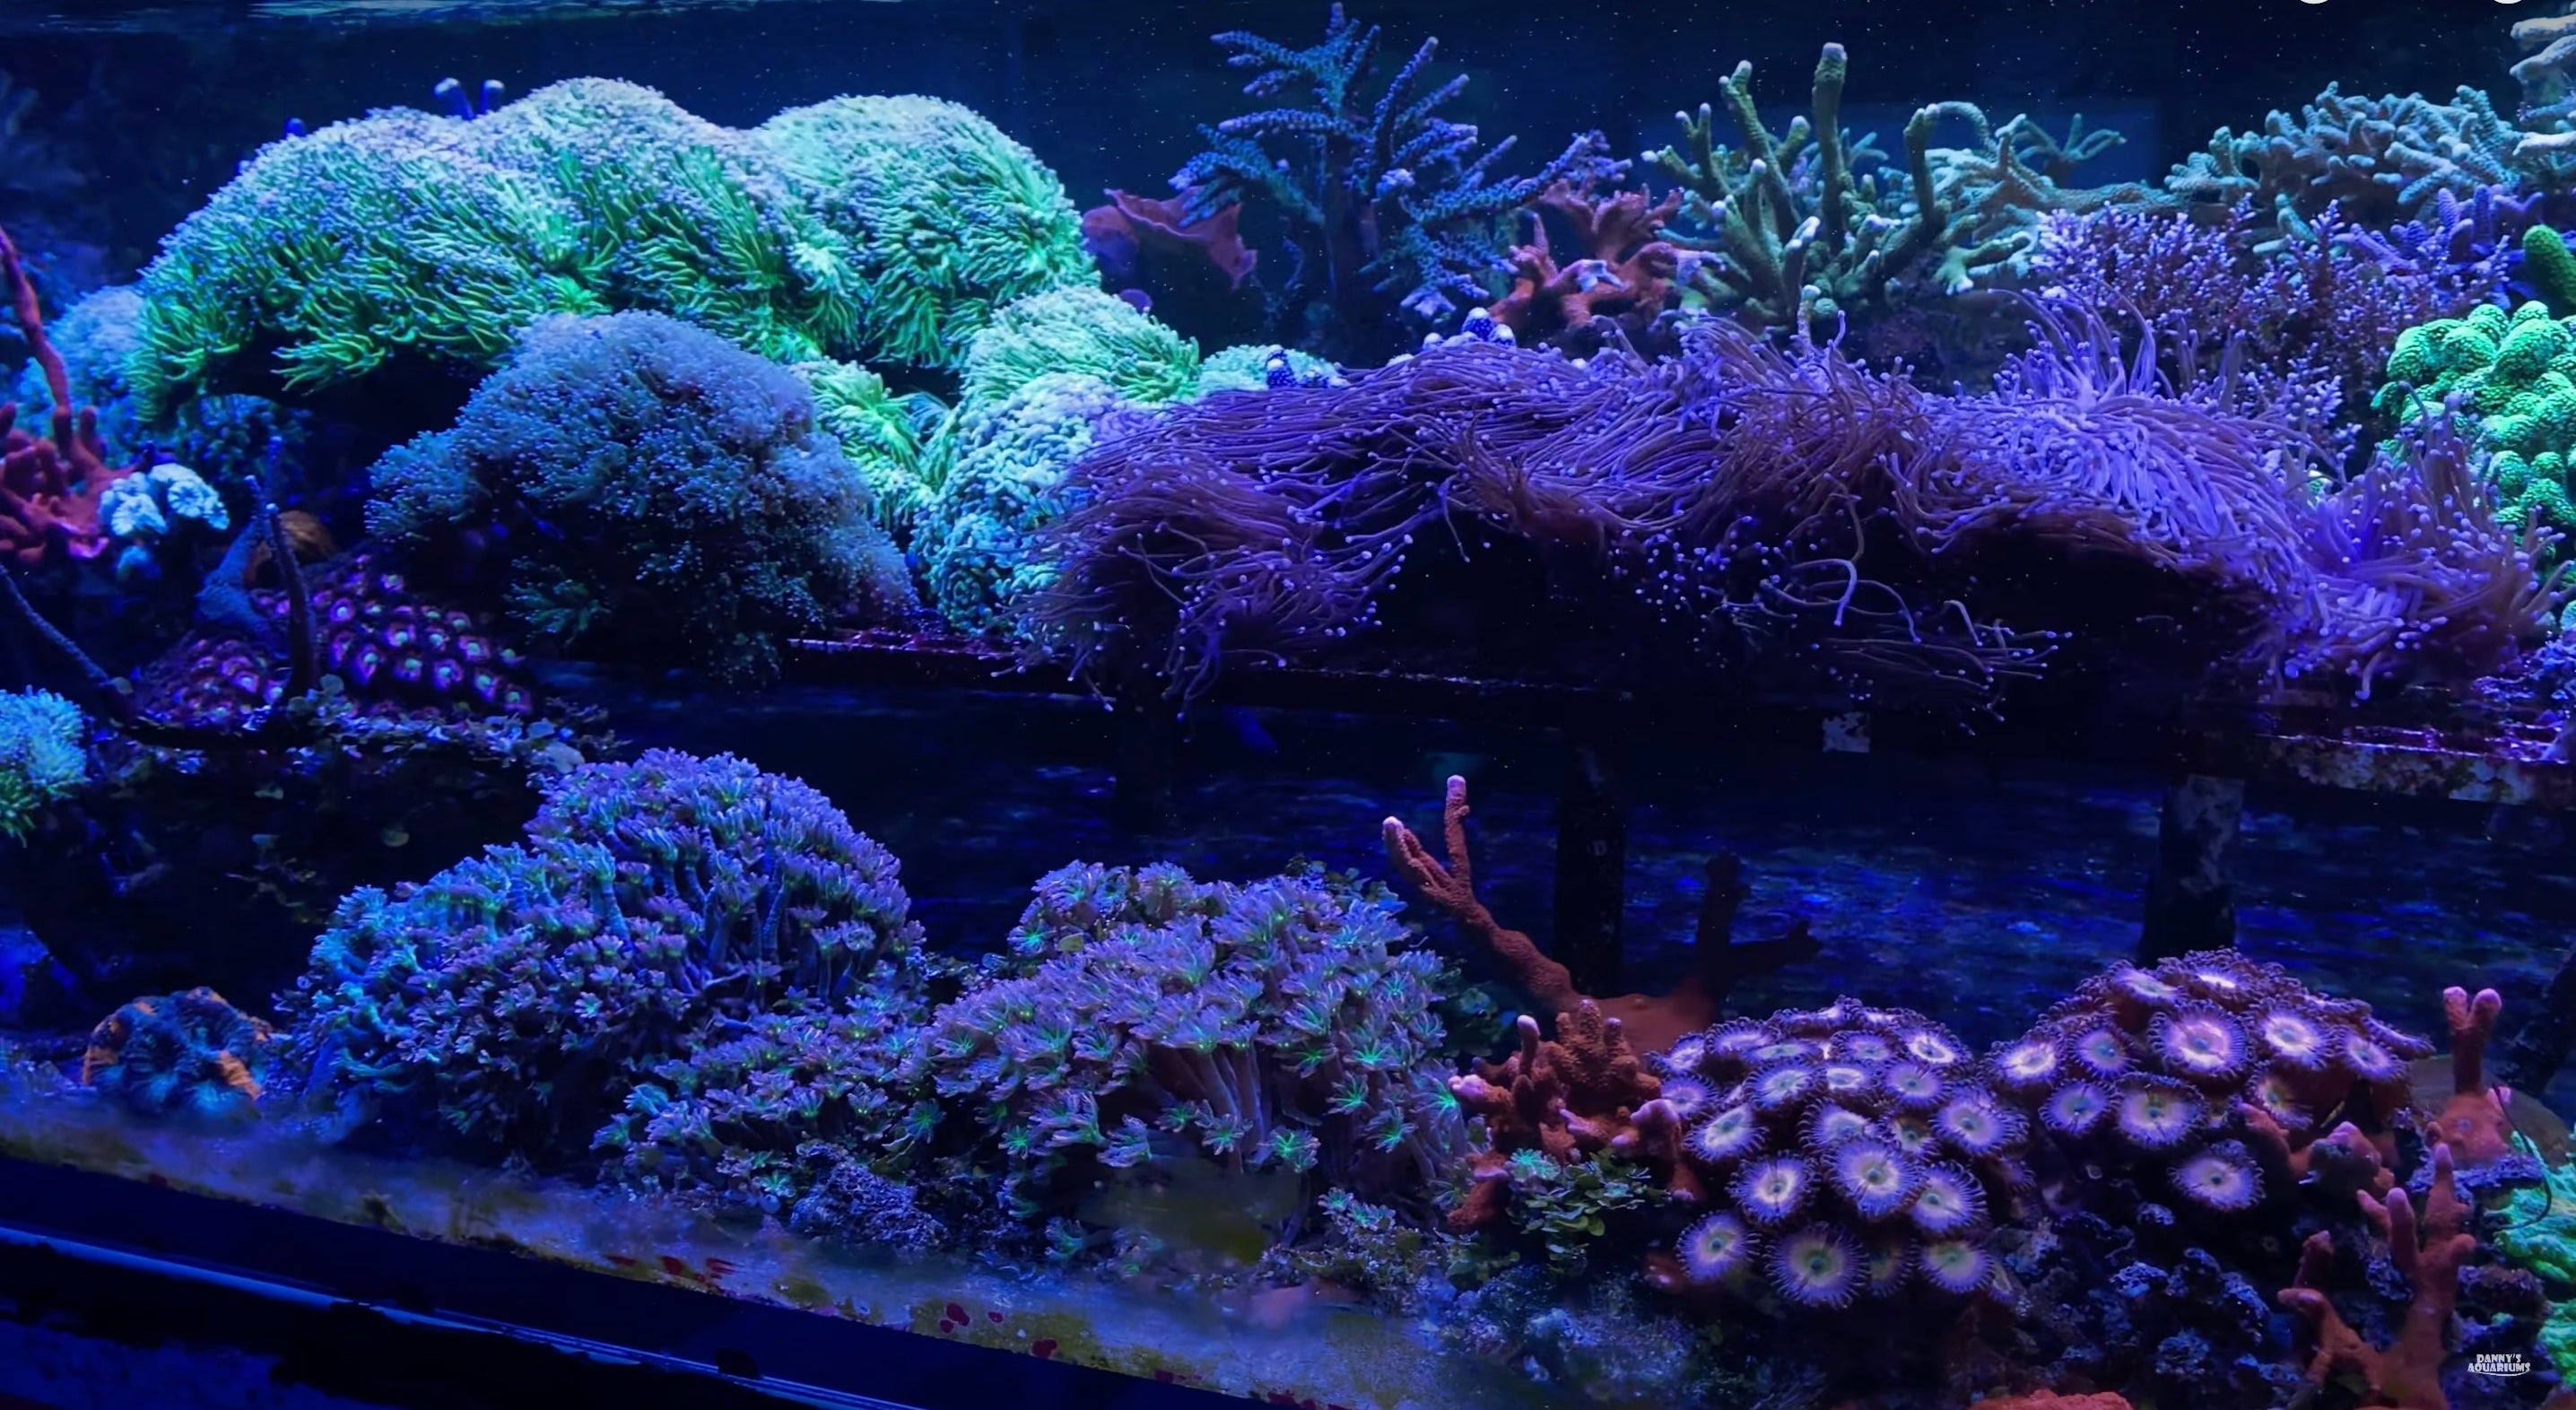 Witness the Magic of Orphek Atlantik & OR3 LED Bars fueling the Stunning Evolution of a 9 Year Old SPS Reef Aquarium!